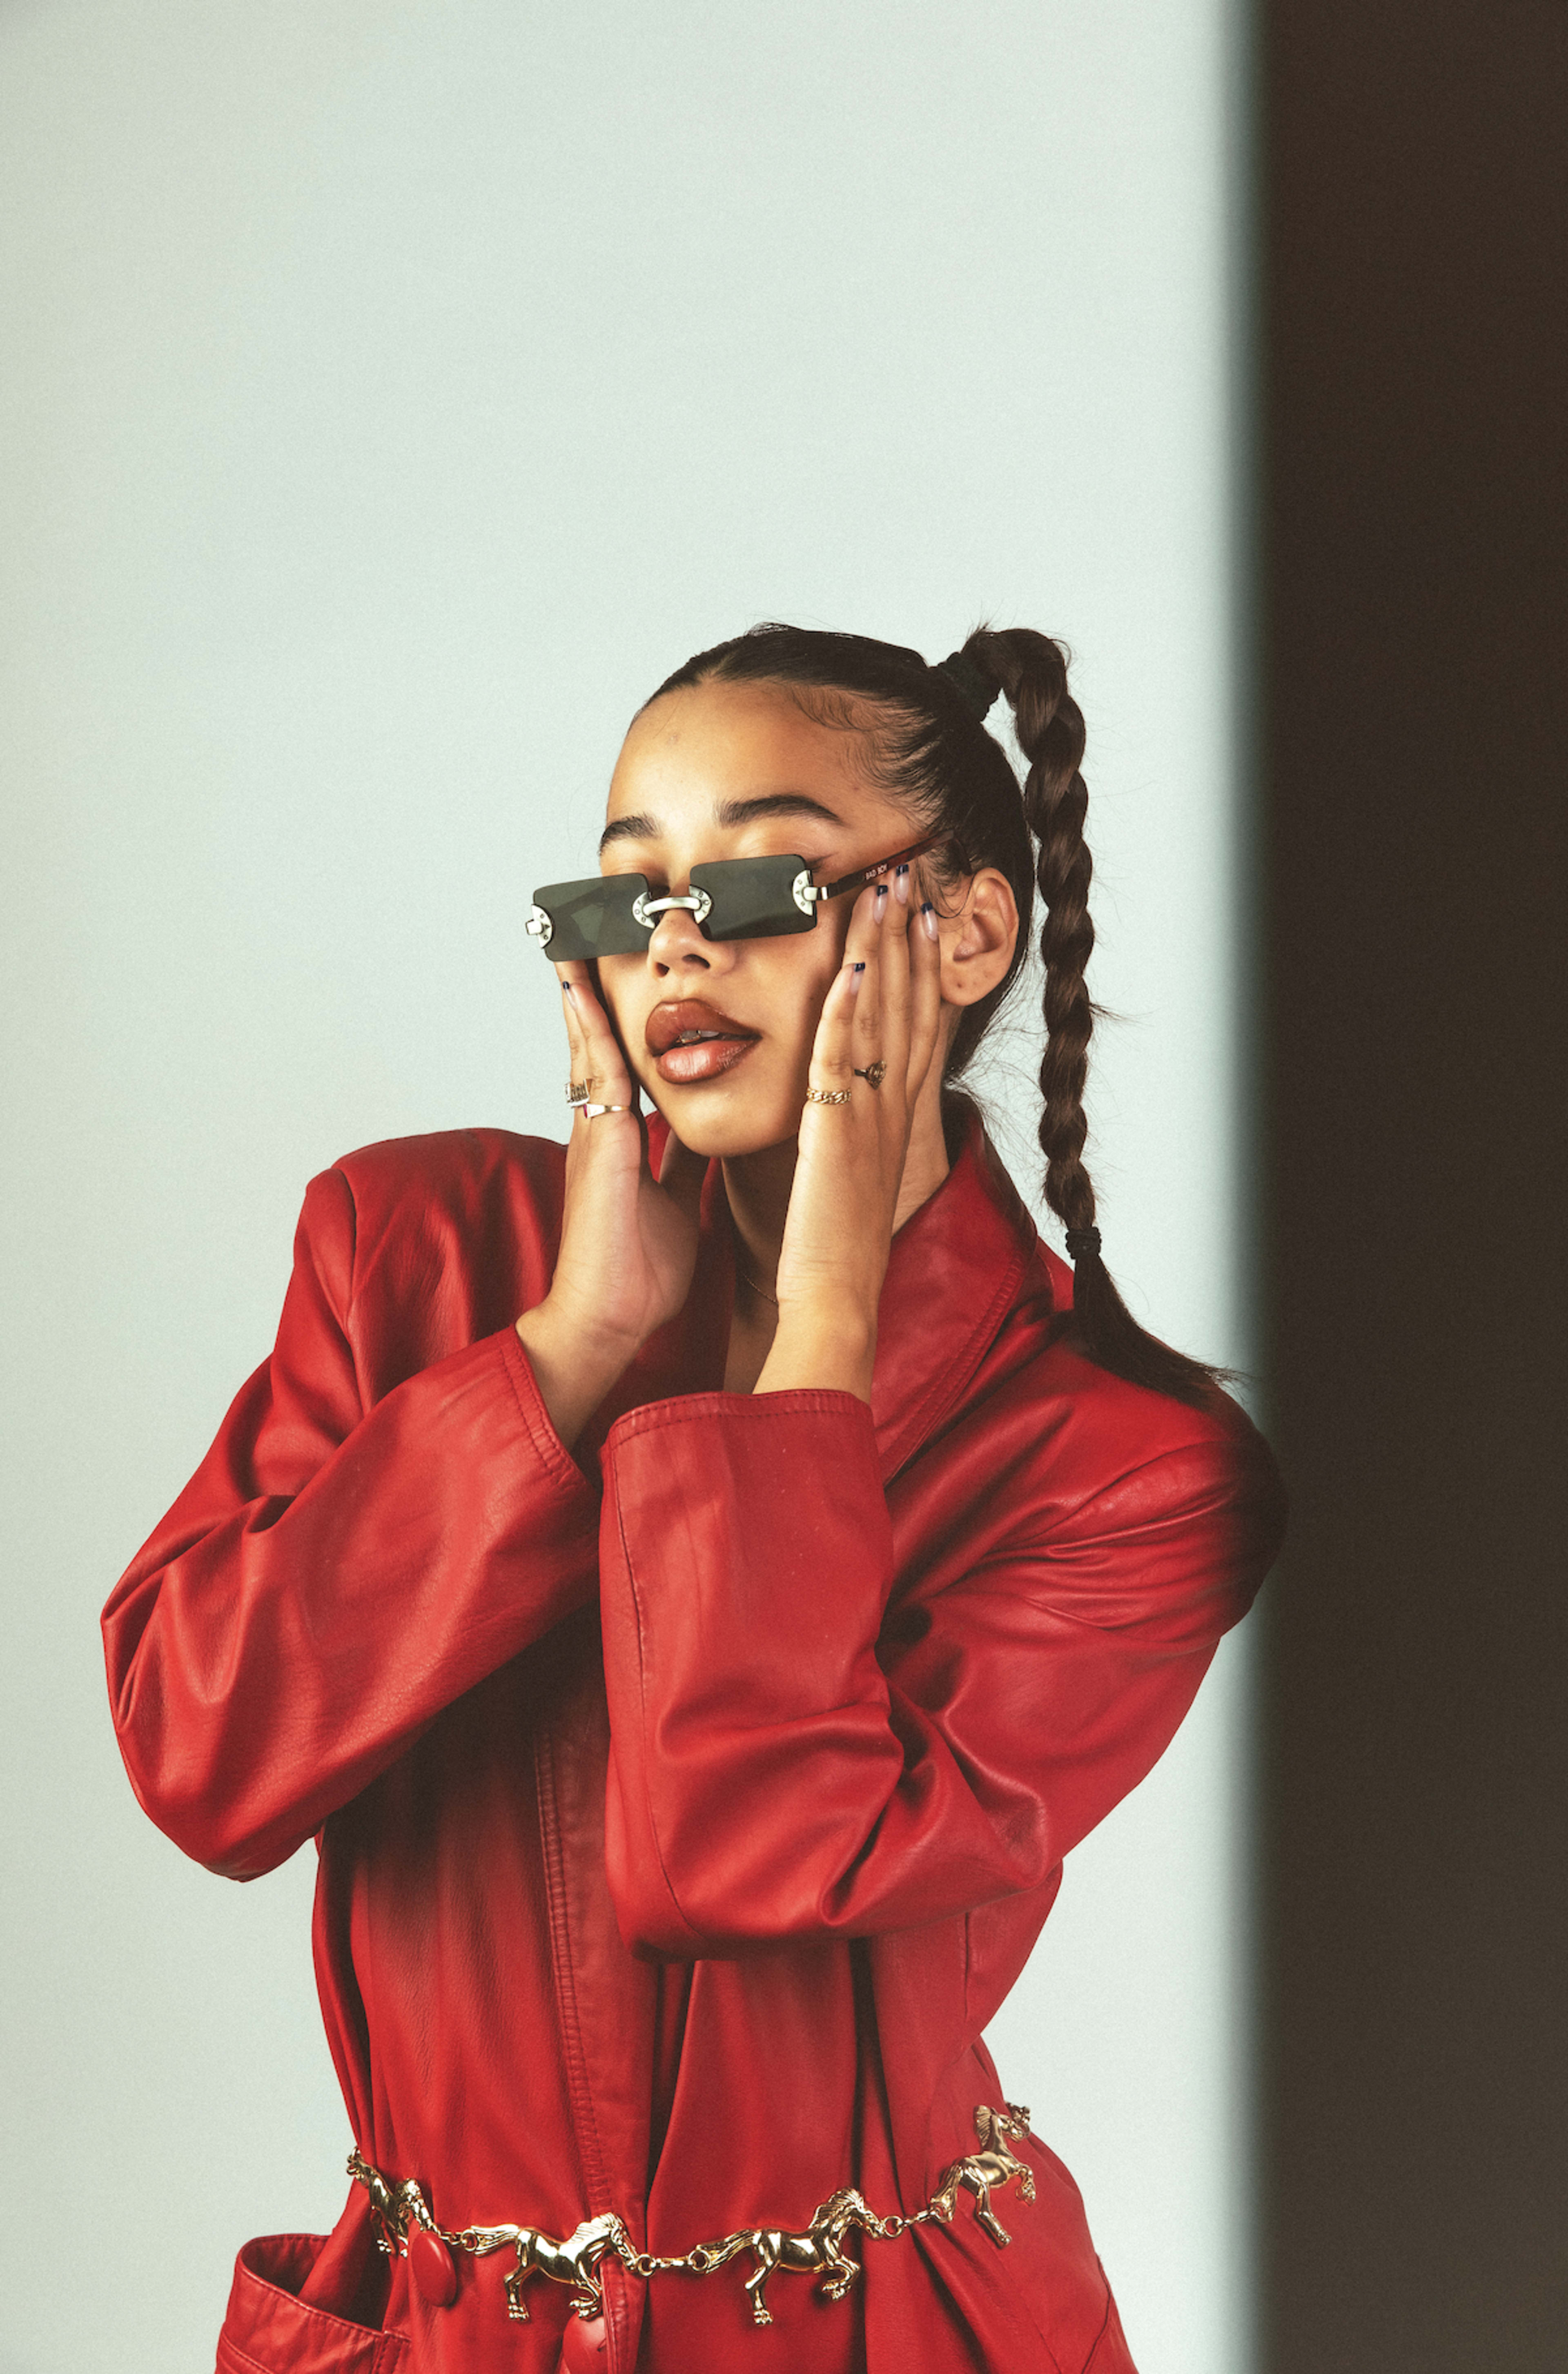 A fashion photoshoot featuring a woman in a red jacket holding a pair of sunglasses.